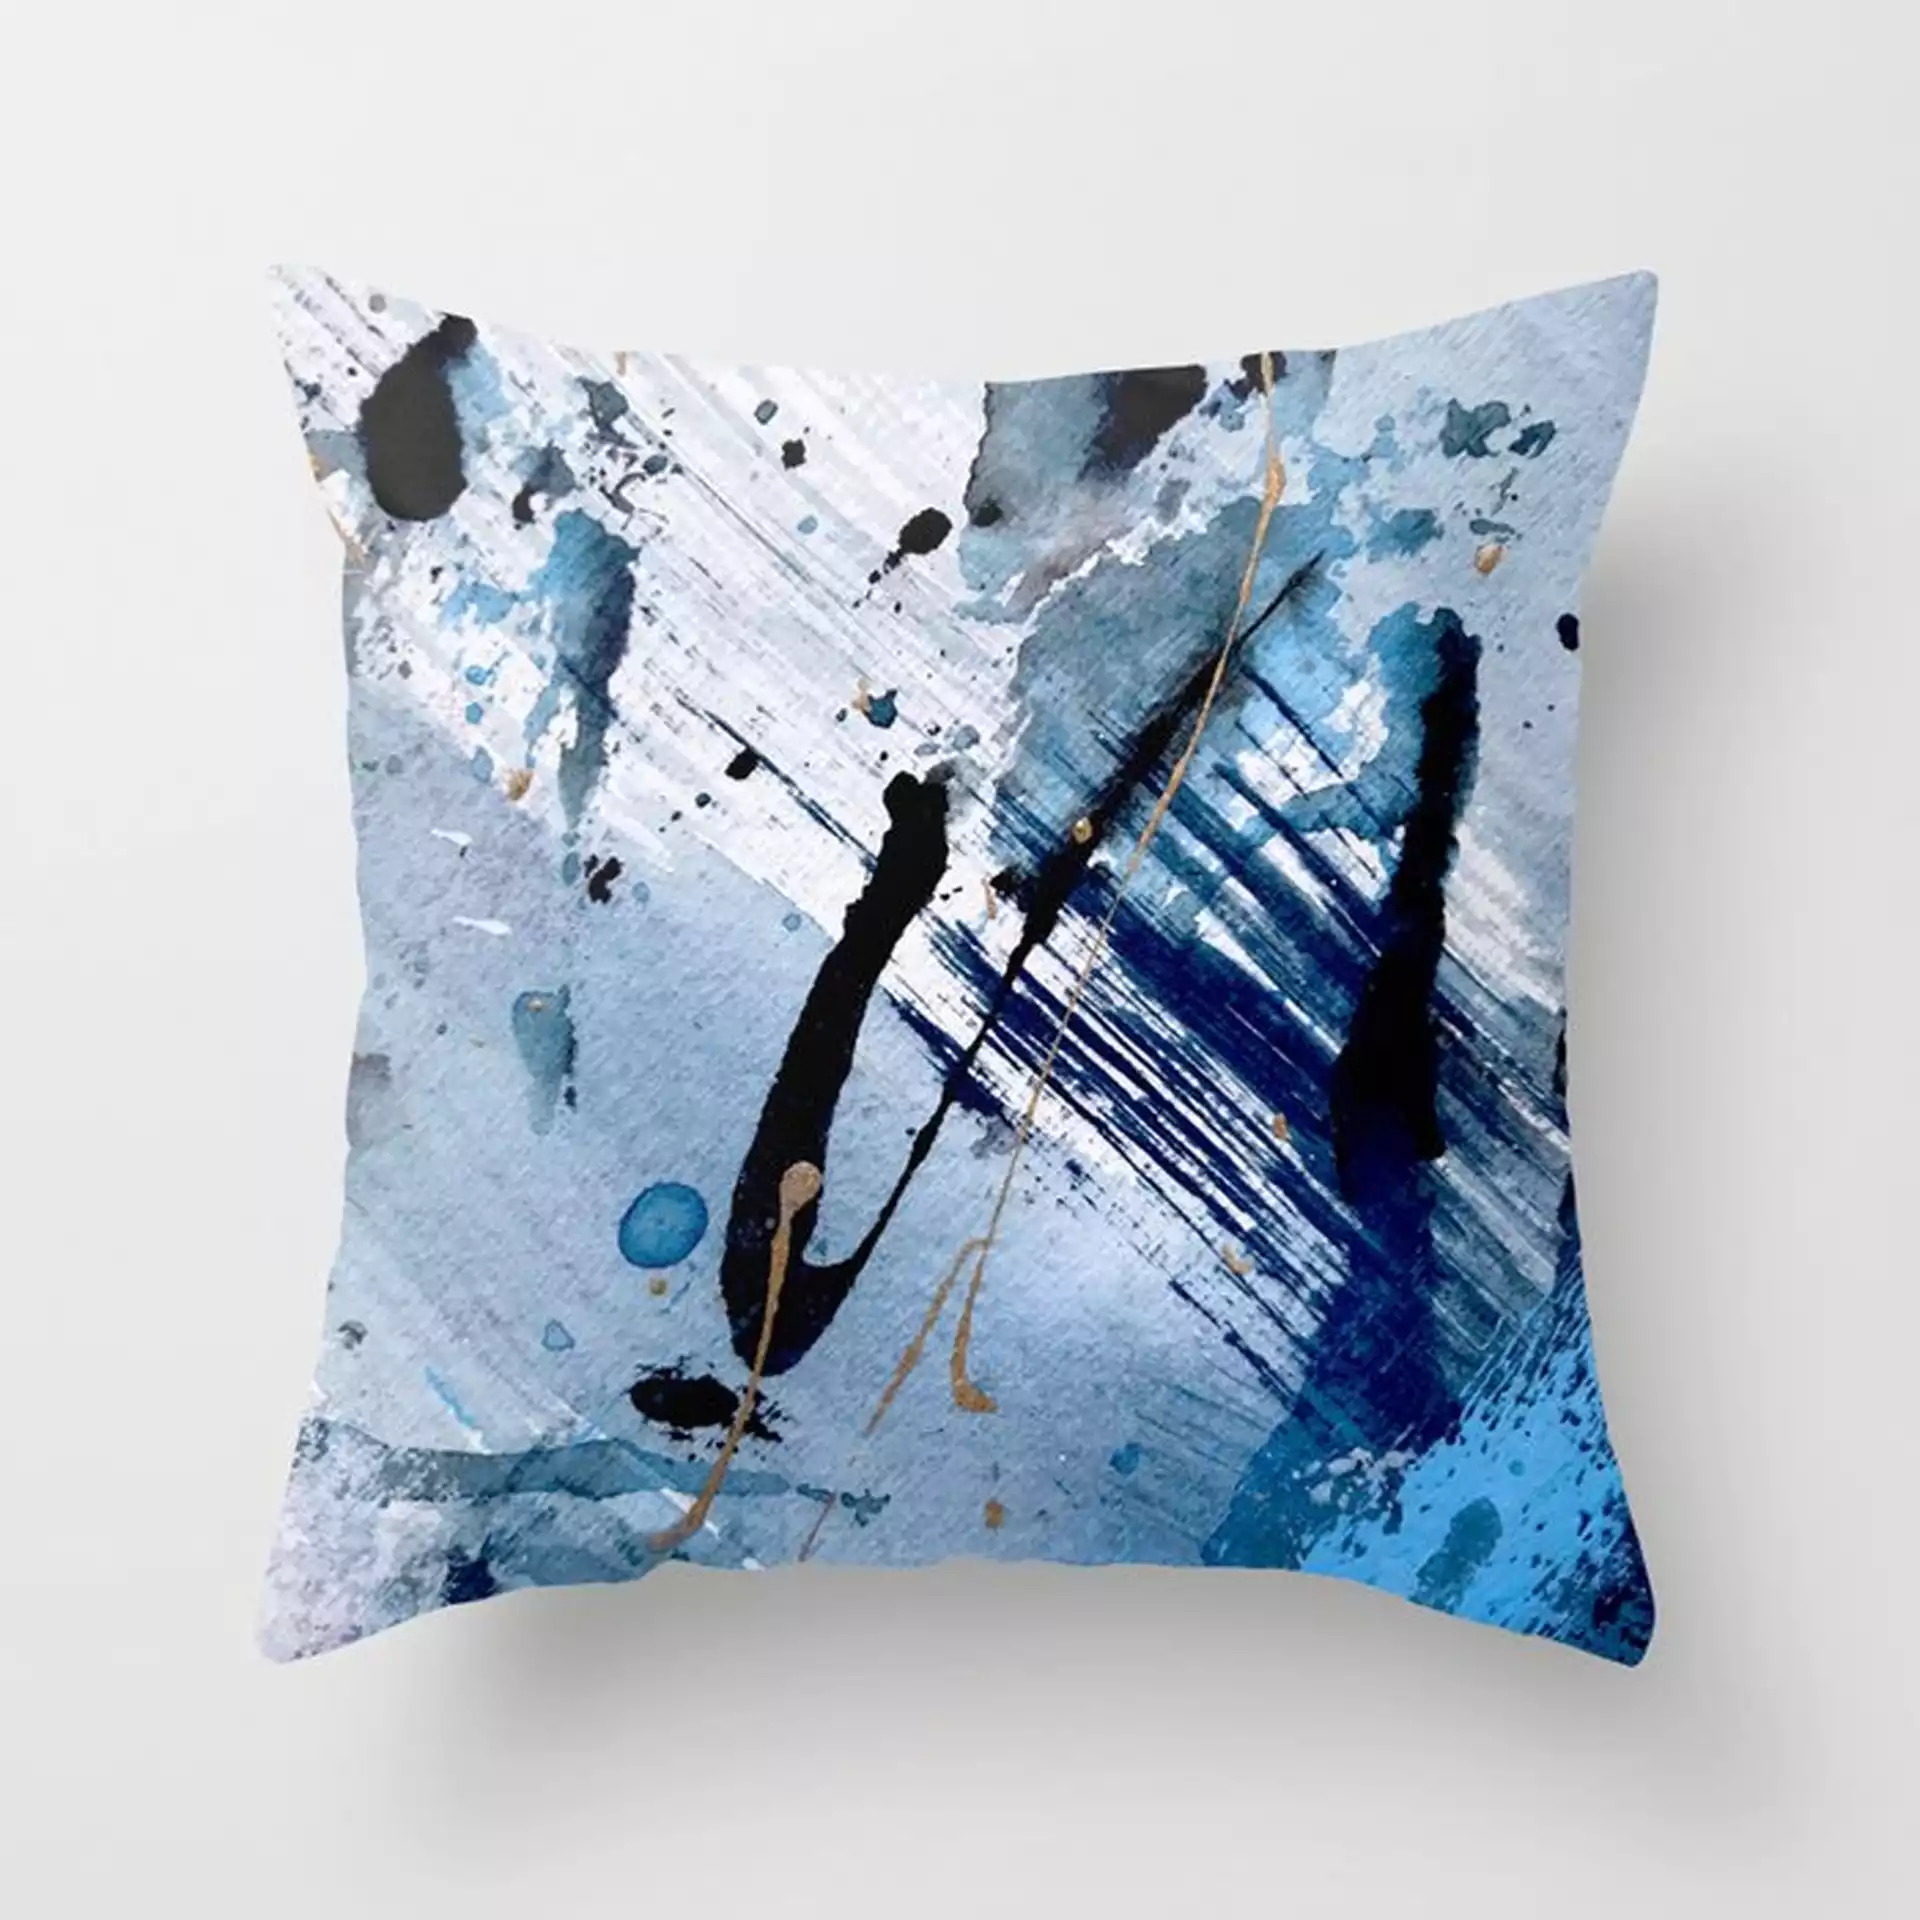 Breathe [2]: Colorful Abstract In Black, Blue, Purple, Gold And White Couch Throw Pillow by Alyssa Hamilton Art - Cover (16" x 16") with pillow insert - Outdoor Pillow